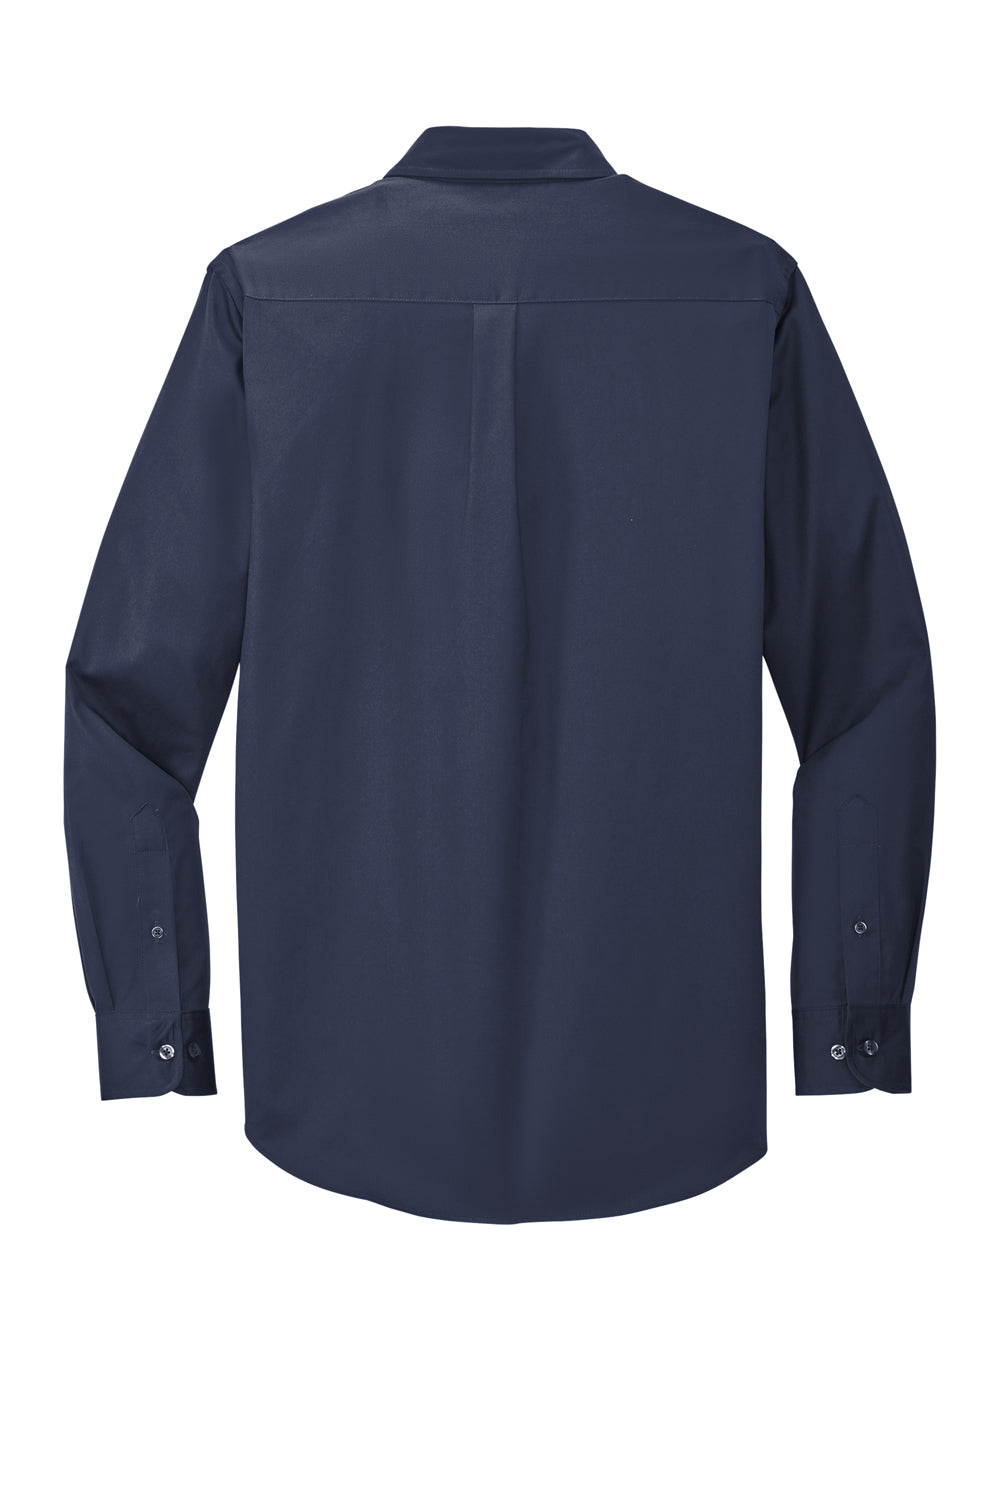 Port Authority S608/TLS608/S608ES Mens Easy Care Wrinkle Resistant Long Sleeve Button Down Shirt w/ Pocket Navy Blue Flat Back